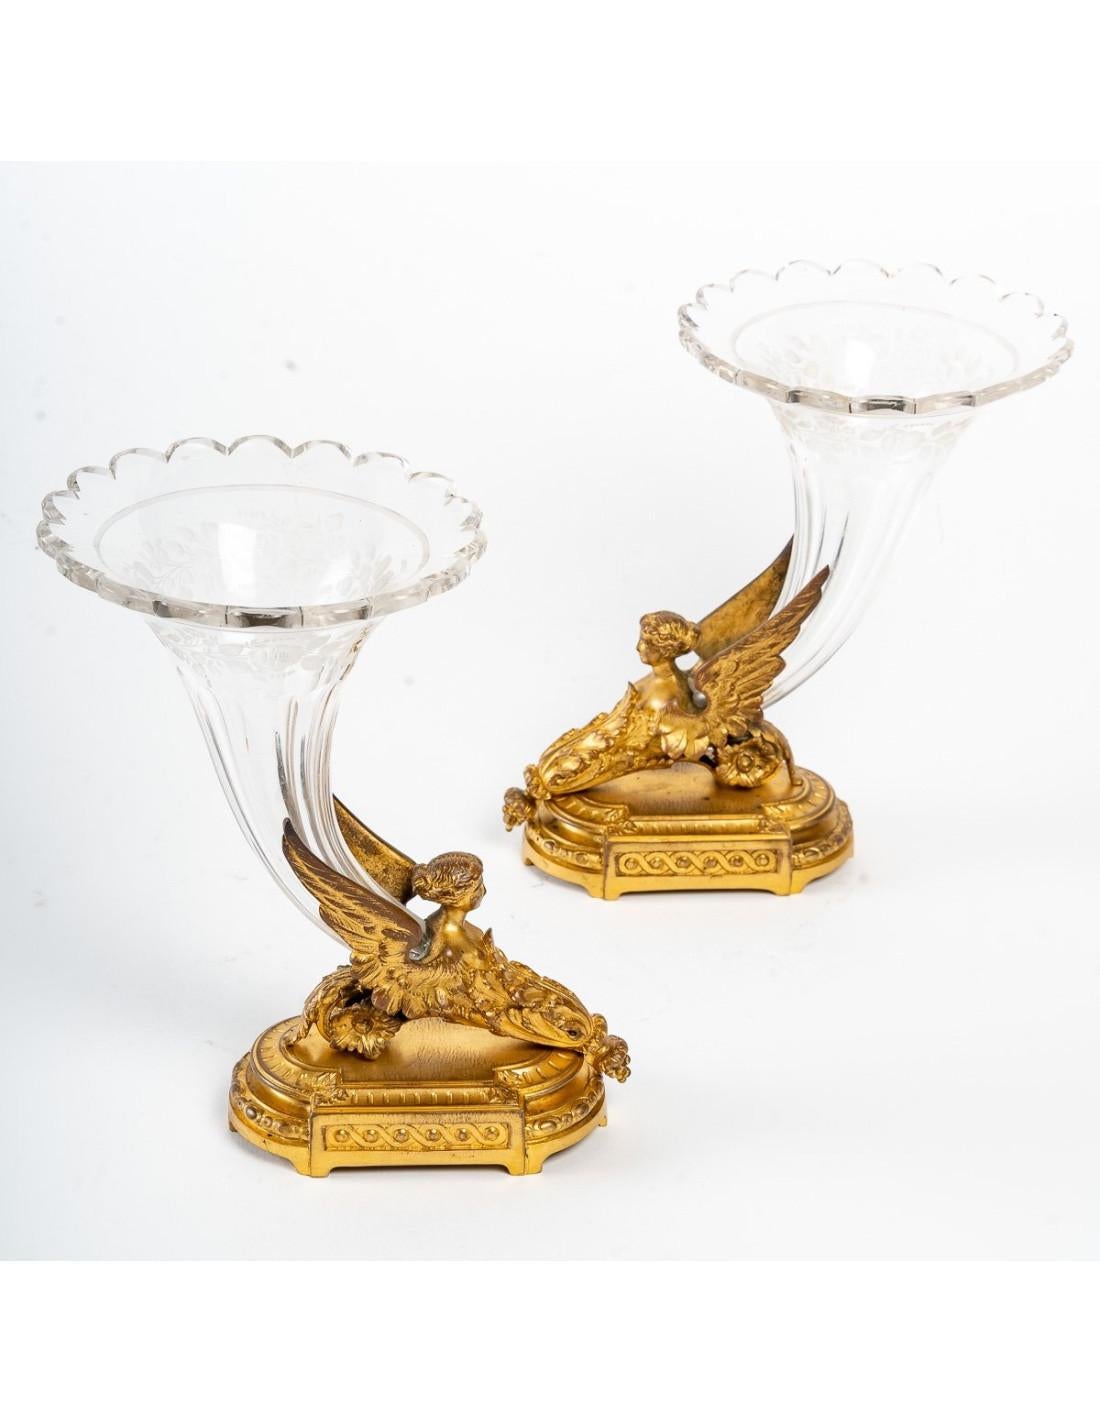 Pair of Crystal and Gilt Bronze Vases, Empire Style

Pair of 19th century Empire style crystal and gilt bronze vases.

Dimensions:

H: 20cm, W: 20cm, D: 13cm.